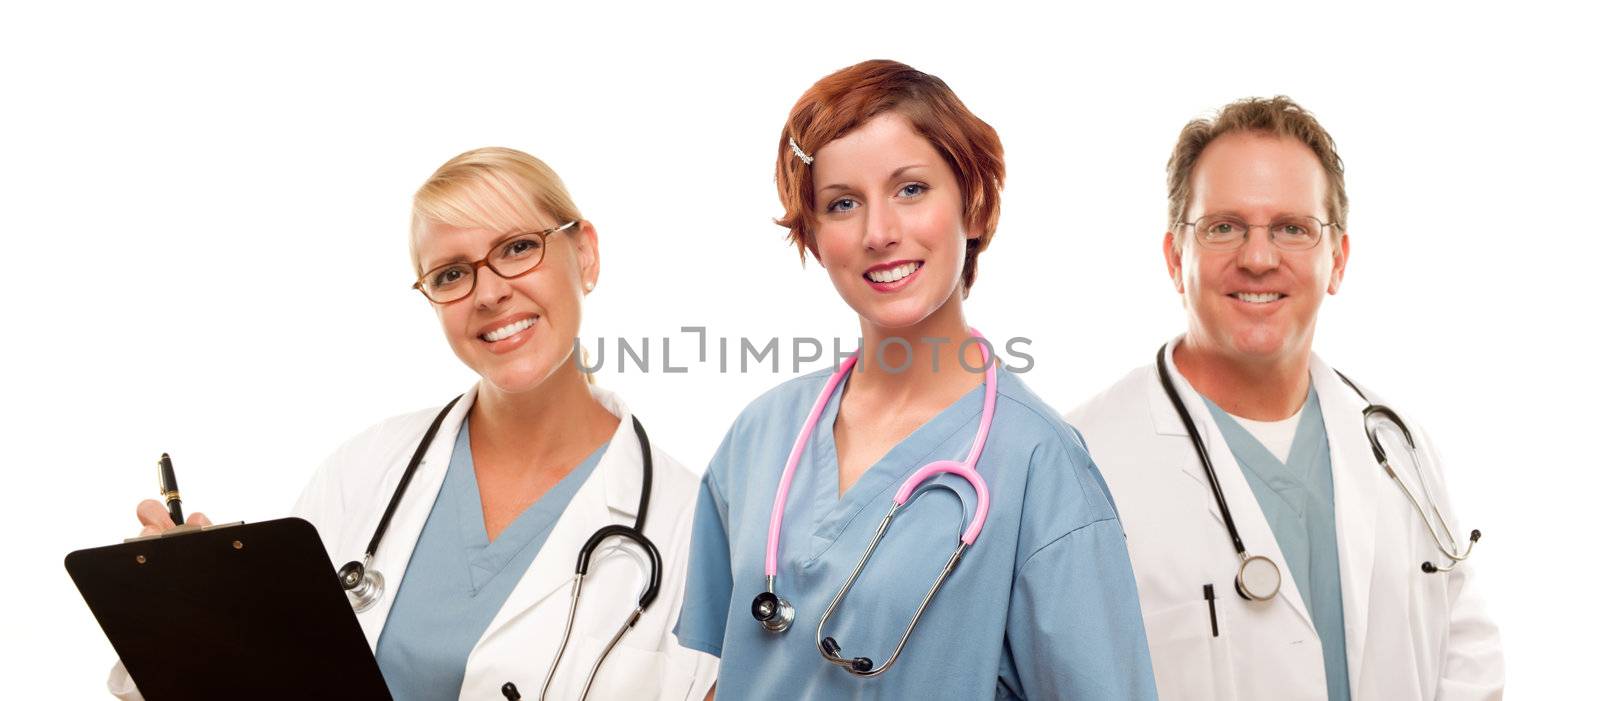 Group of Doctors or Nurses on a White Background by Feverpitched